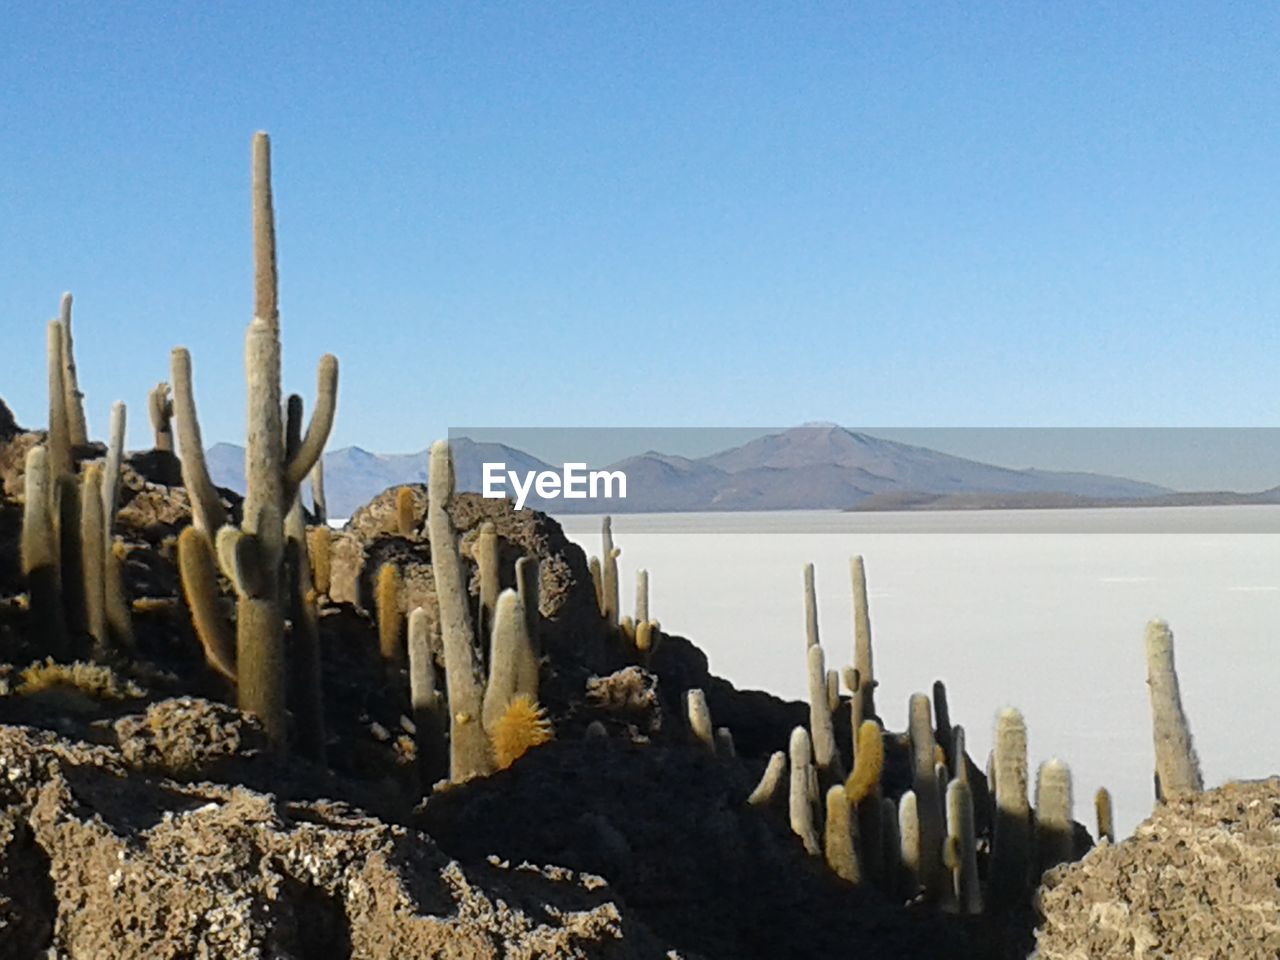 PANORAMIC VIEW OF CACTUS AGAINST BLUE SKY